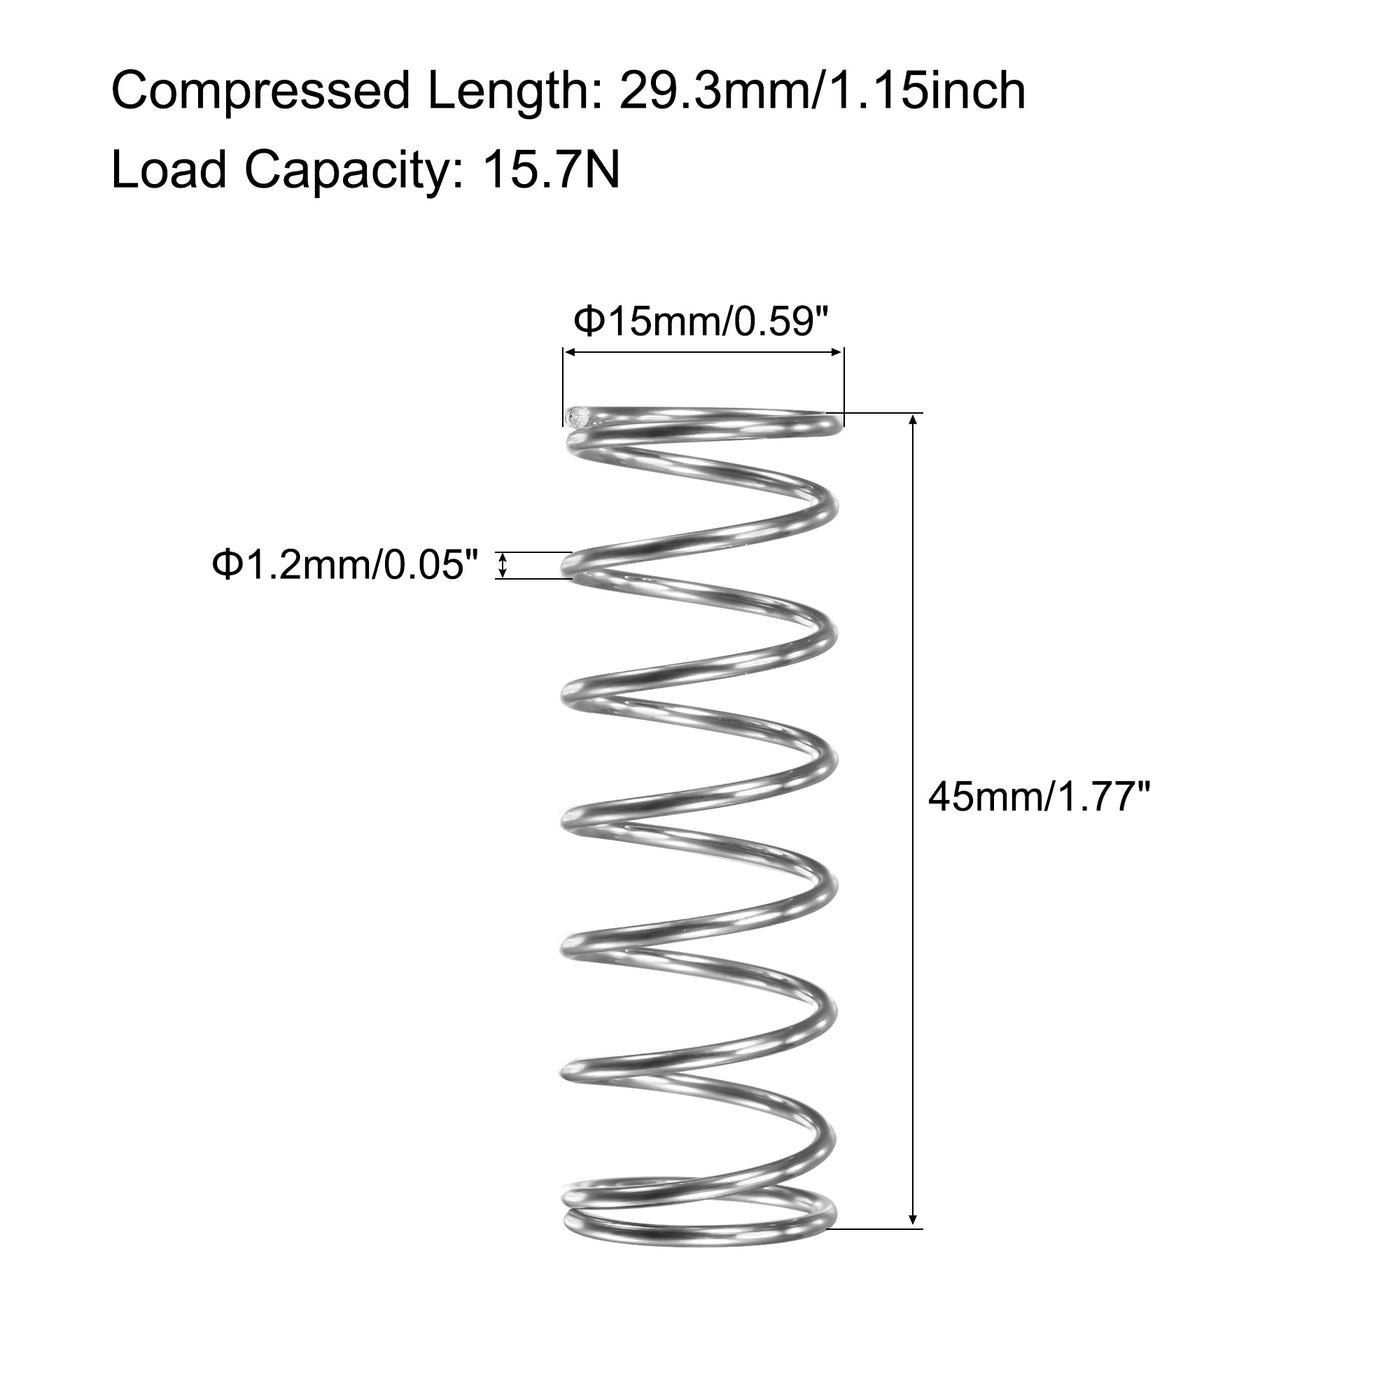 uxcell Uxcell 15mmx1.2mmx45mm 304 Stainless Steel Compression Spring 15.7N Load Capacity 5pcs